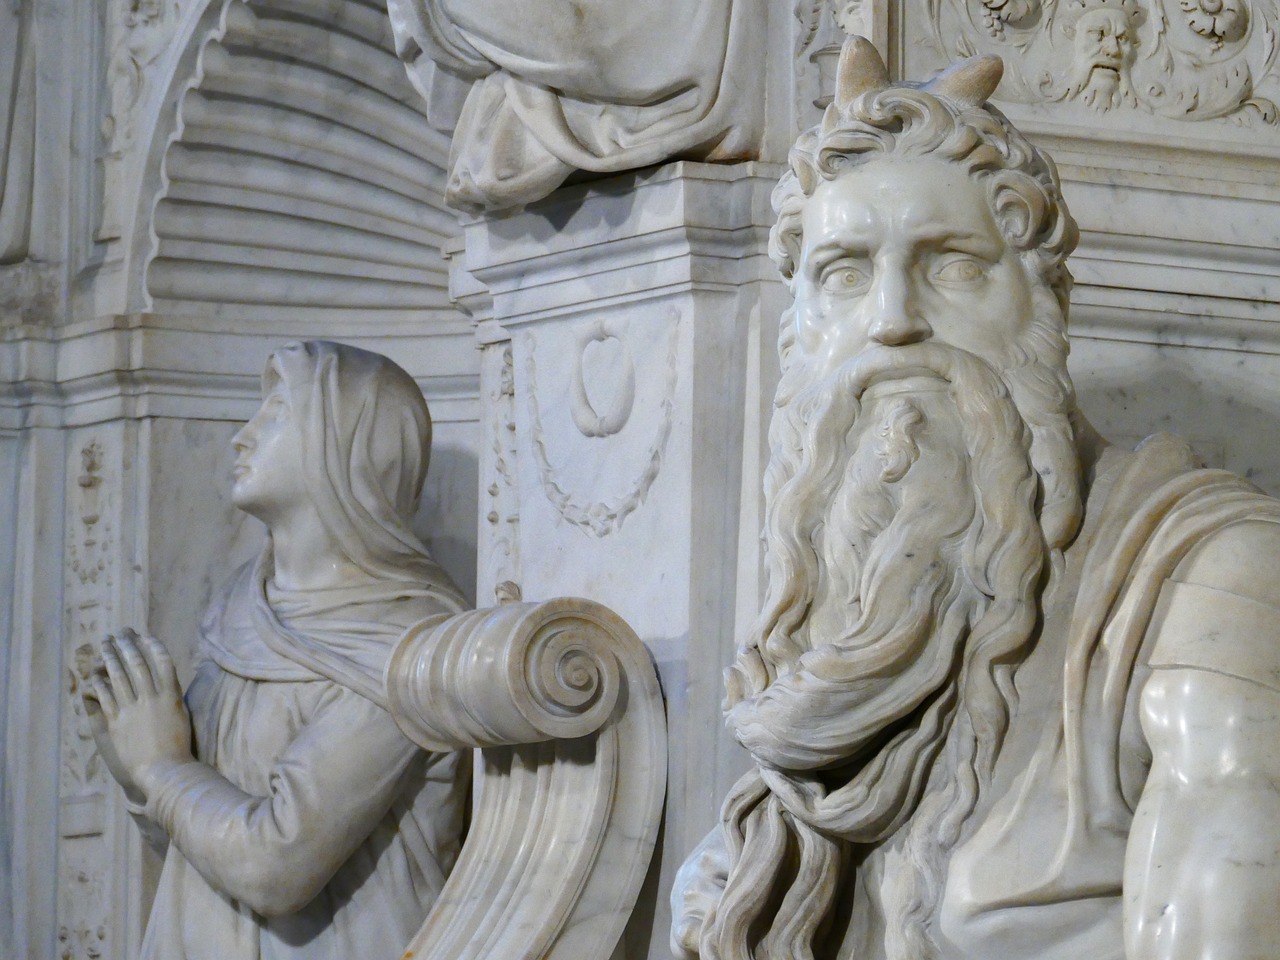 a statue of a man standing next to a statue of a woman, a marble sculpture, by Michelangelo Buonarotti, flickr, an ancient male bearded face, moses, depth detail, mausoleum